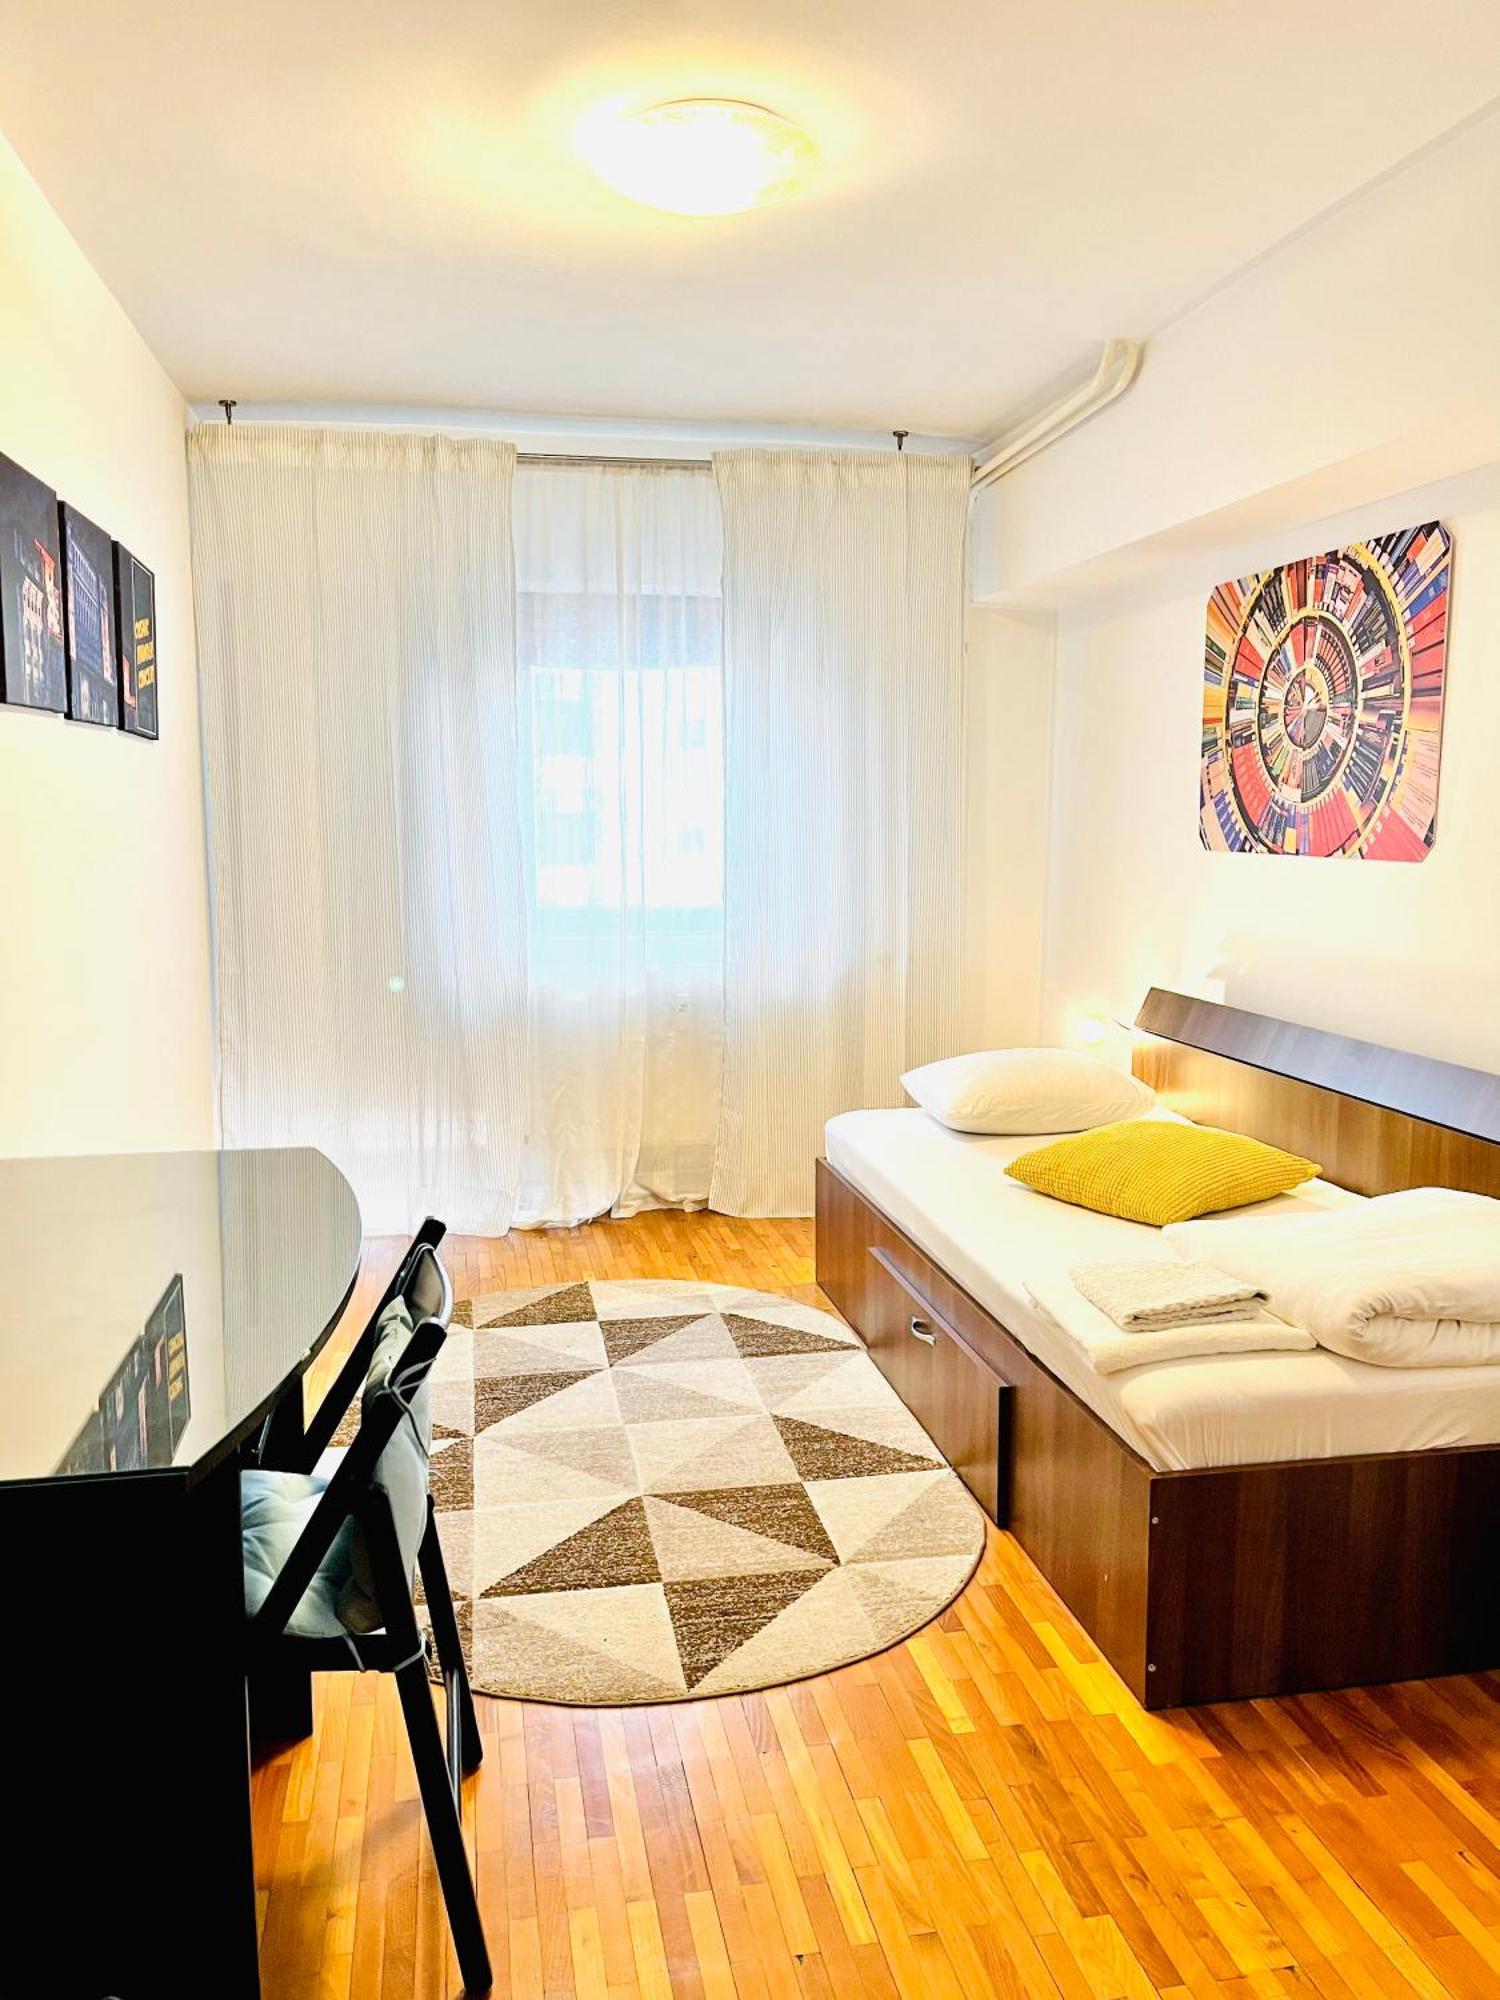 City Center Unirii Square Private Rooms With City View - Shared Amenities Bukarest Værelse billede